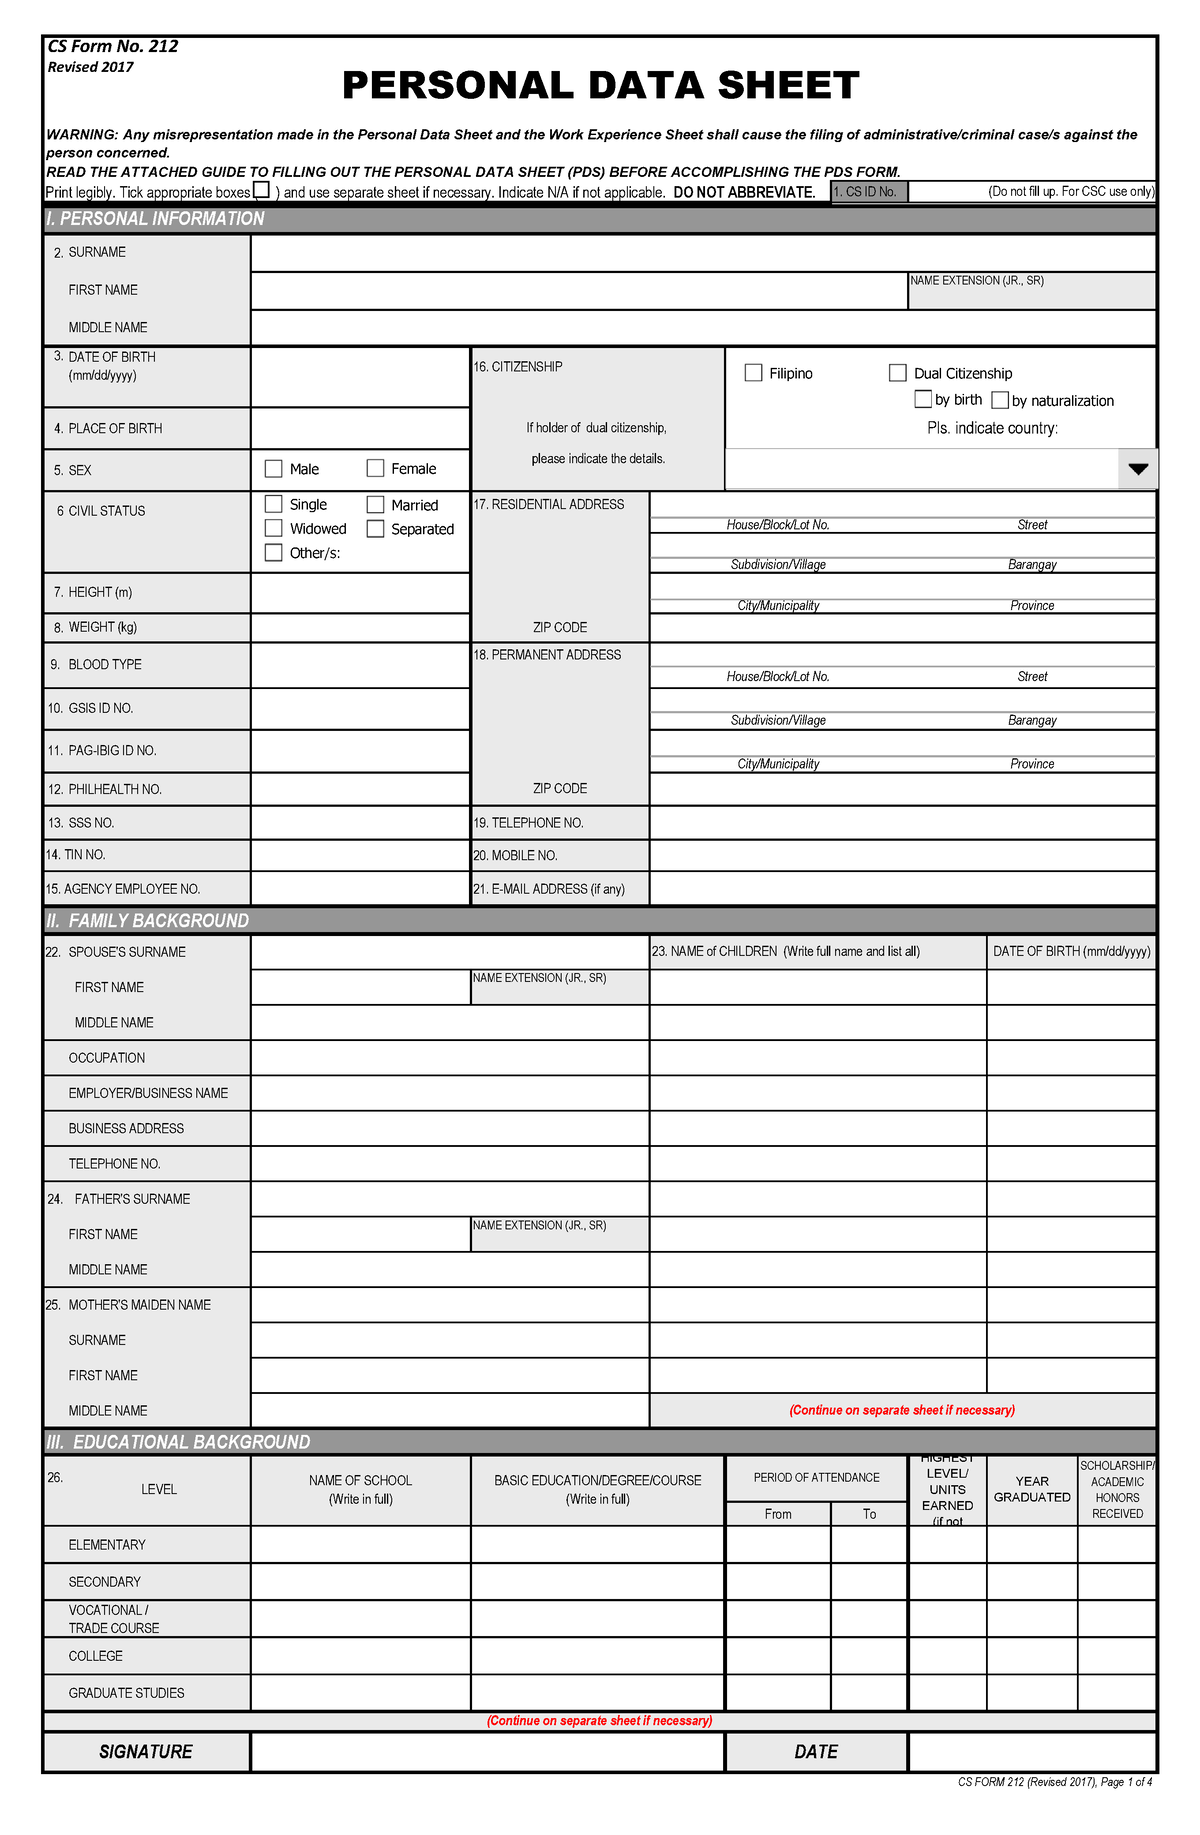 PDS CS Form No 212 Revised 2017 Print legibly. Tick appropriate boxes